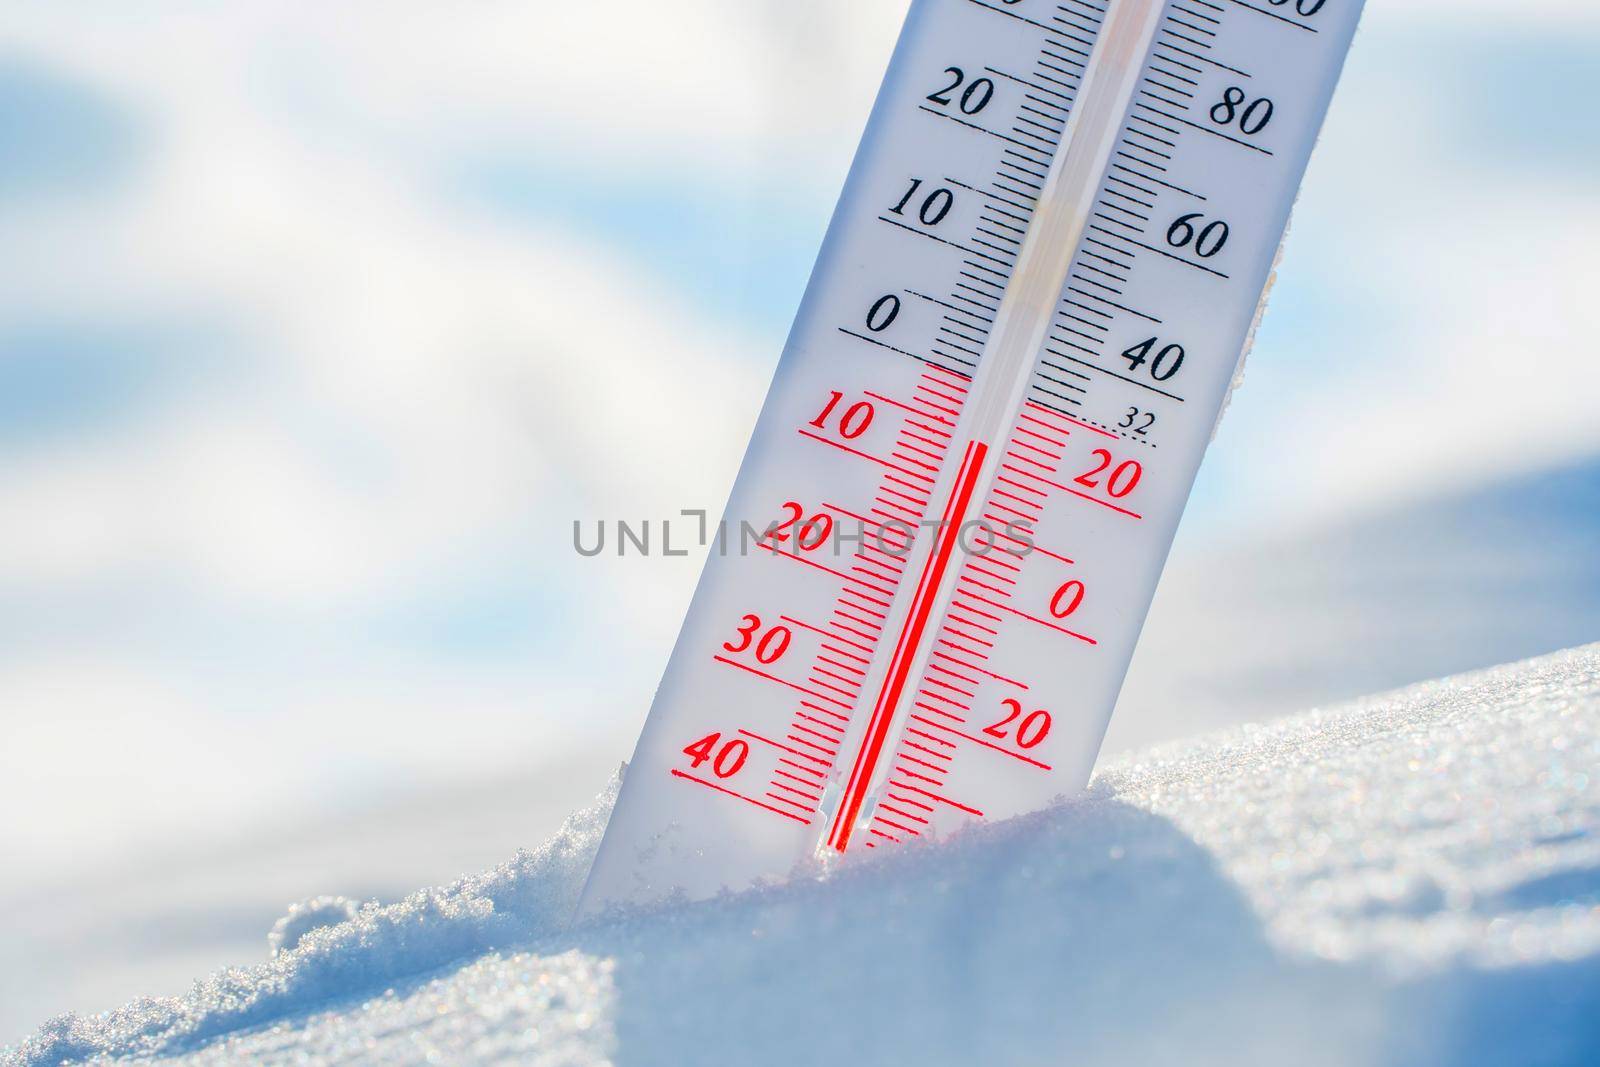 The thermometer lies on the snow in winter showing a negative temperature.Meteorological conditions in a harsh climate in winter with low air and ambient temperatures.Freeze in wintertime.Sunny winter by YevgeniySam